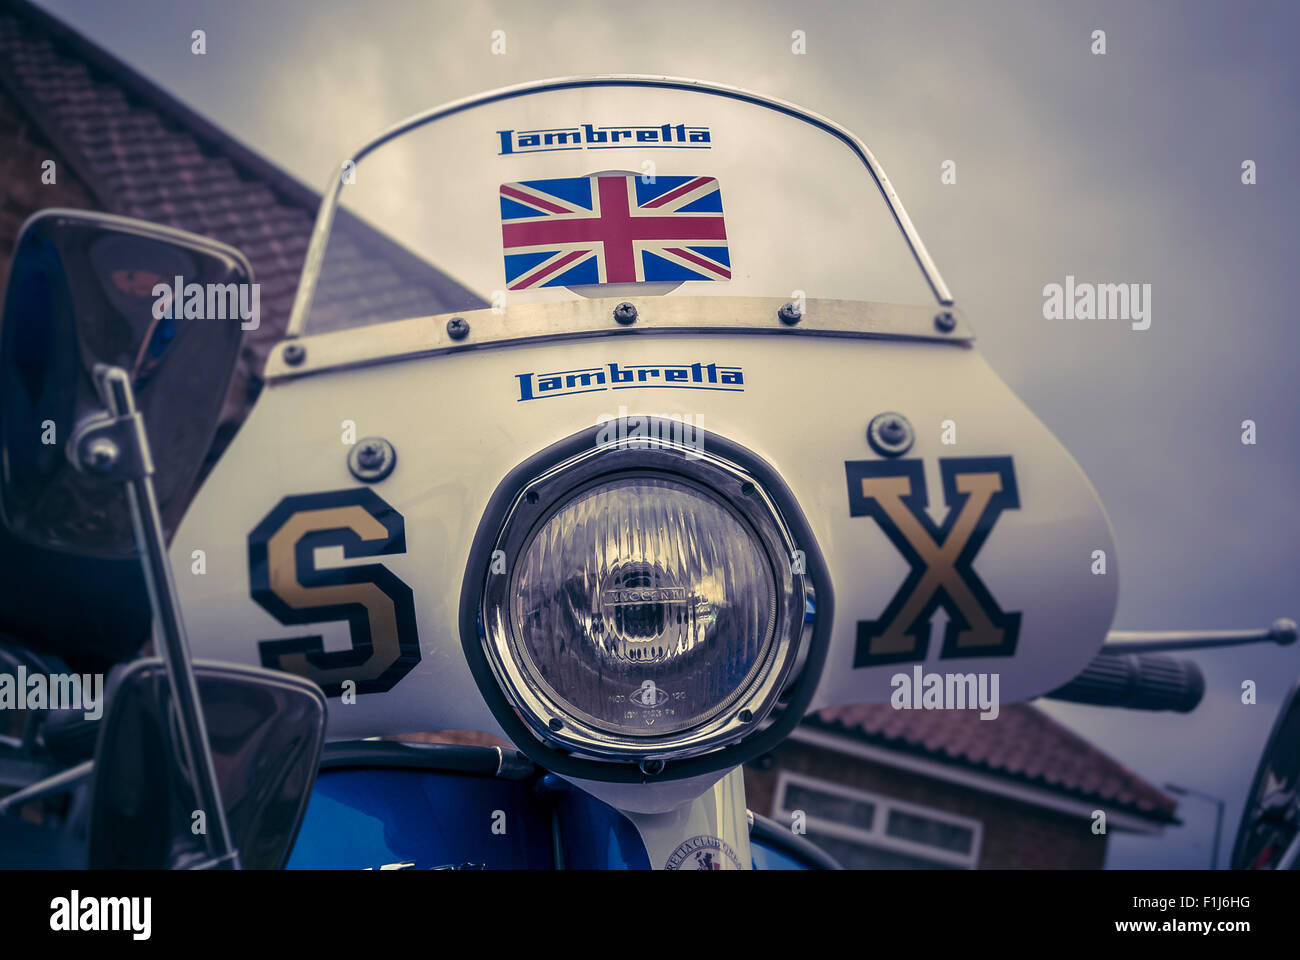 Front view of Lambretta headlight and windscreen motorcycle Stock Photo